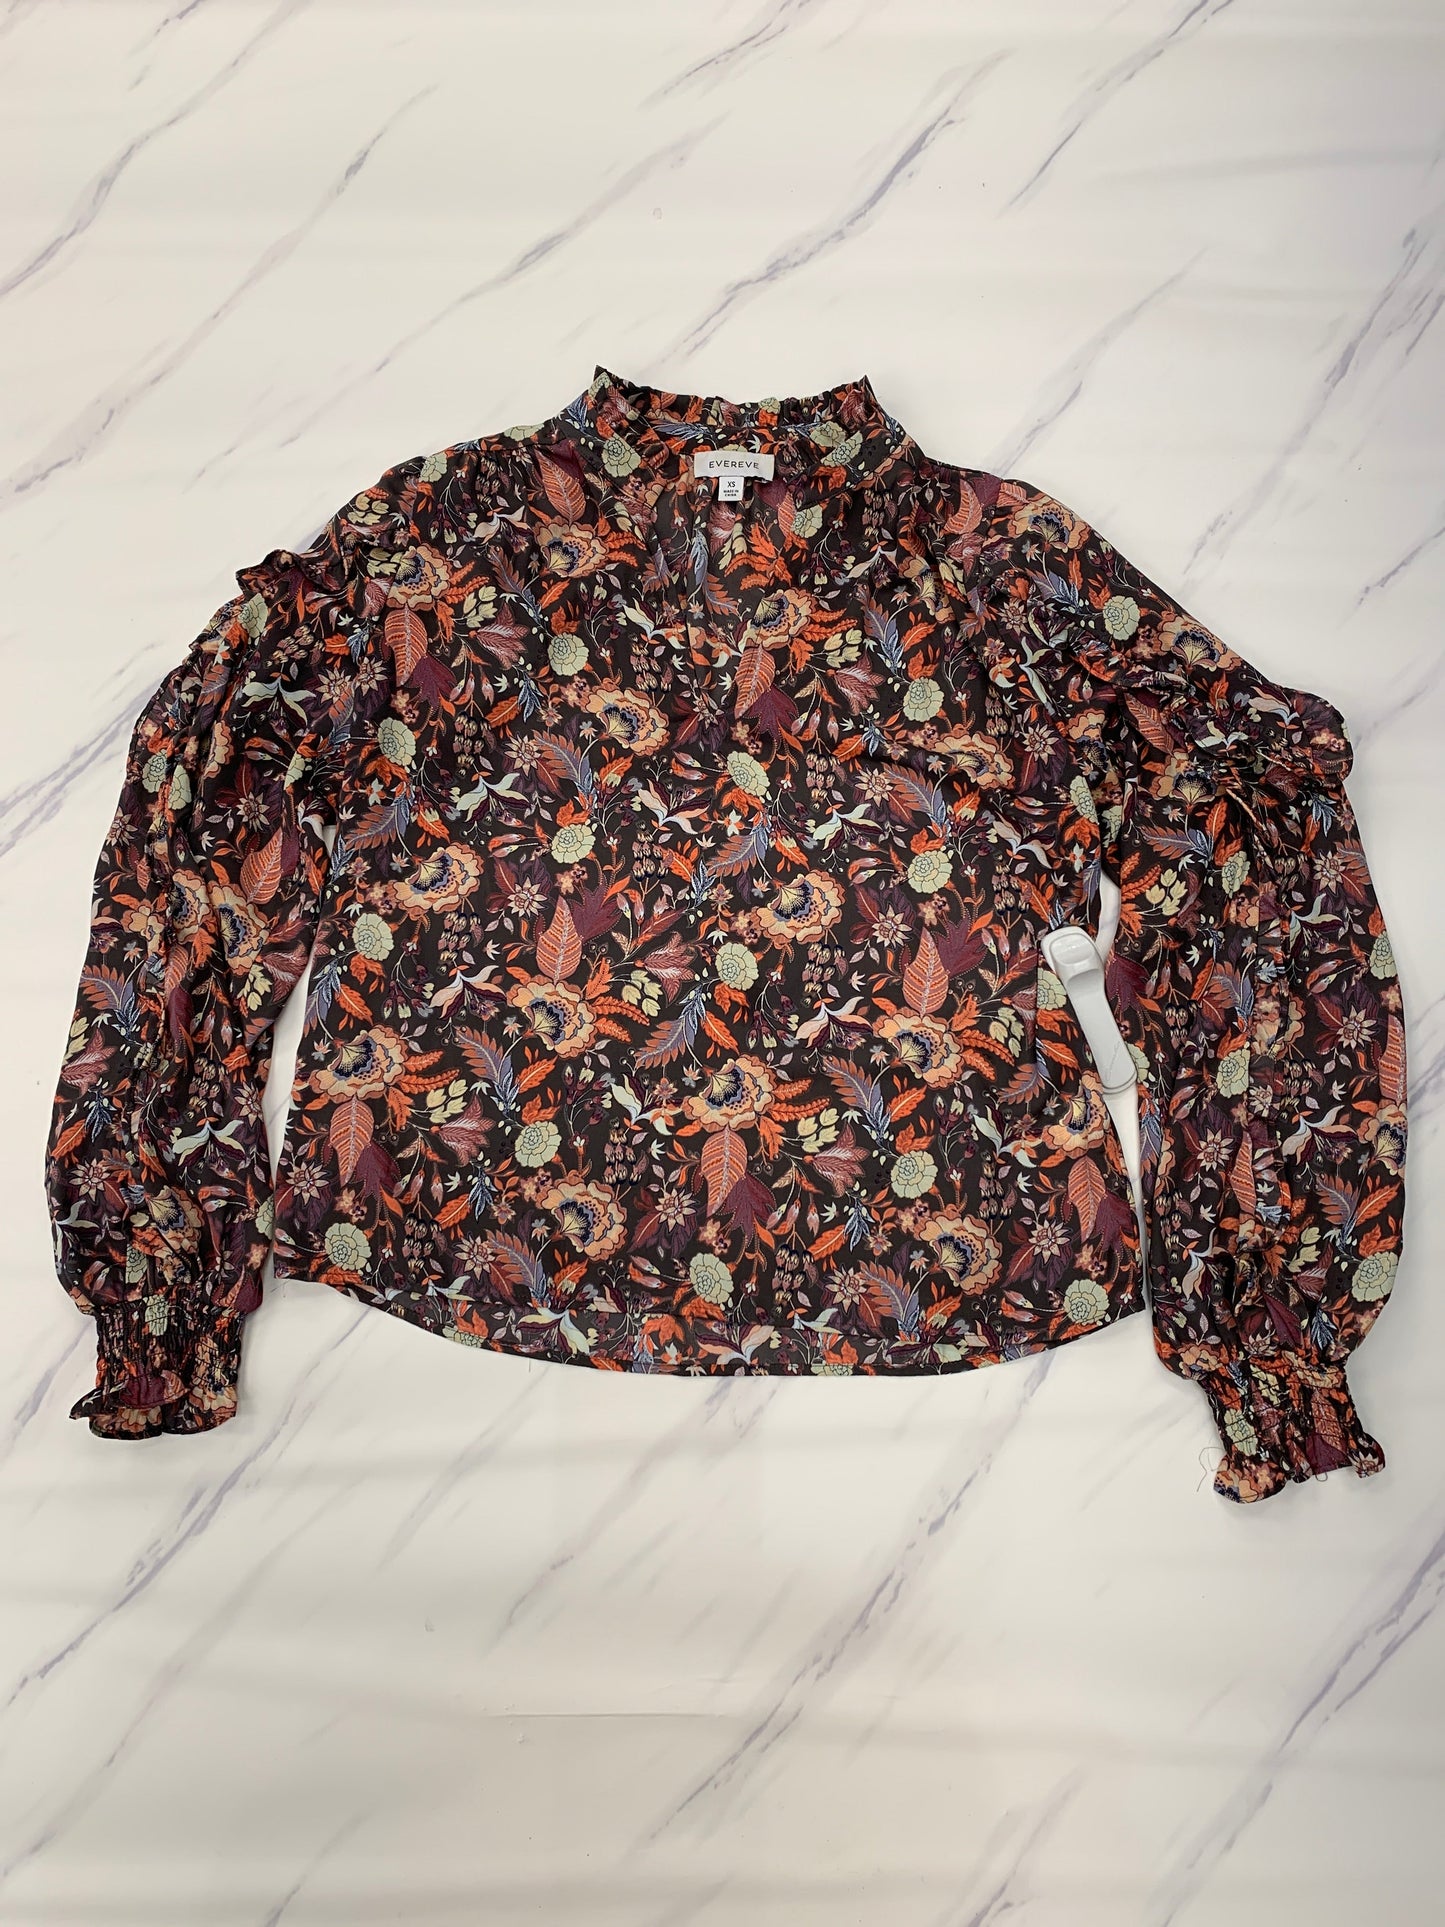 Floral Print Top Long Sleeve Evereve, Size Xs